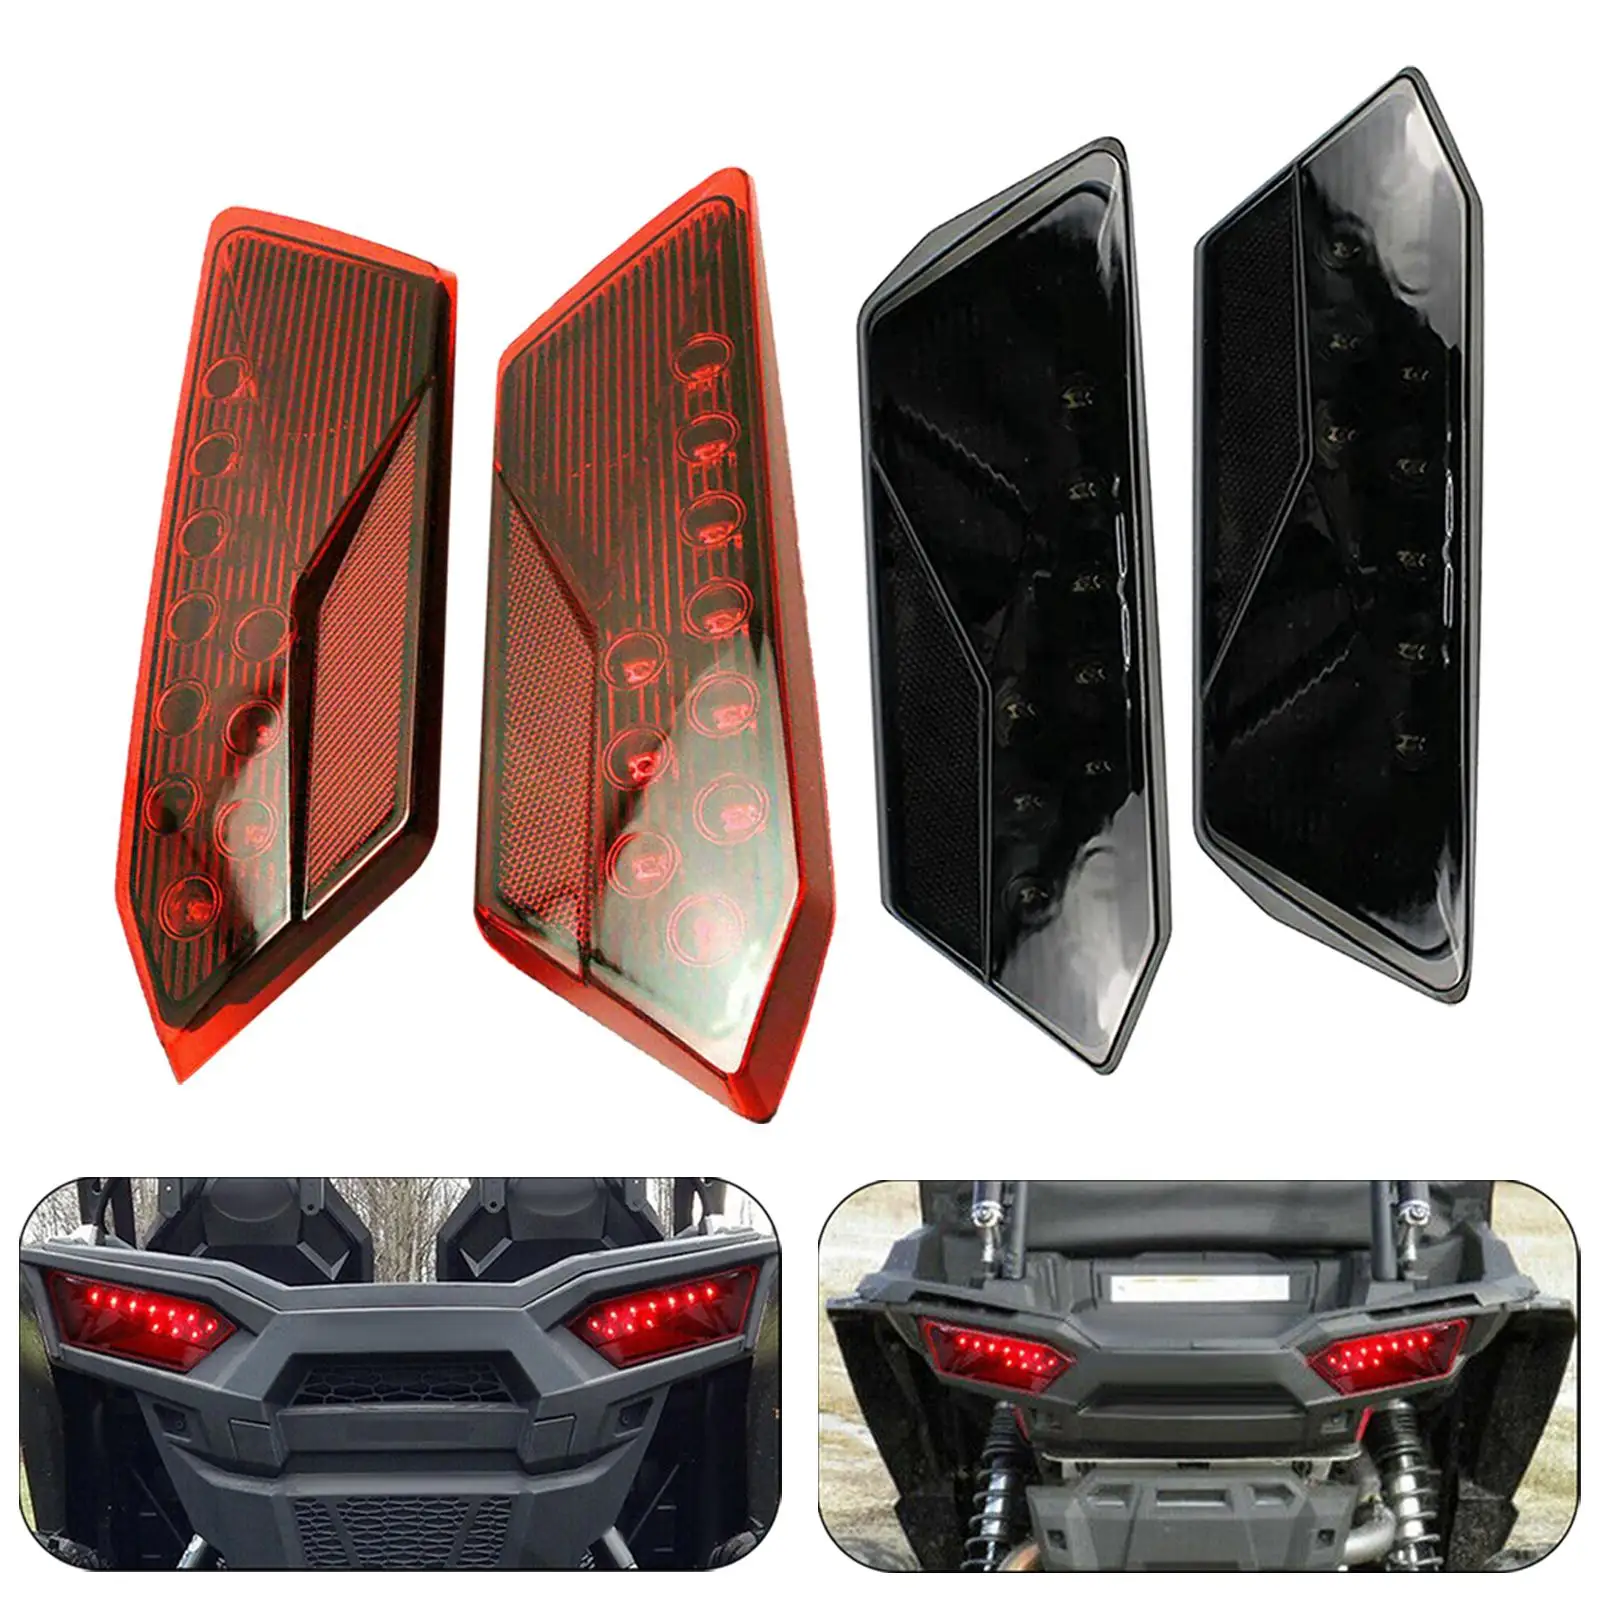 2Pcs Tail Lights Accessories Driving Lights Rear Brake Stop Lights Tail Lamps Fit for Polaris RZR 2412341 2412342 Replaces